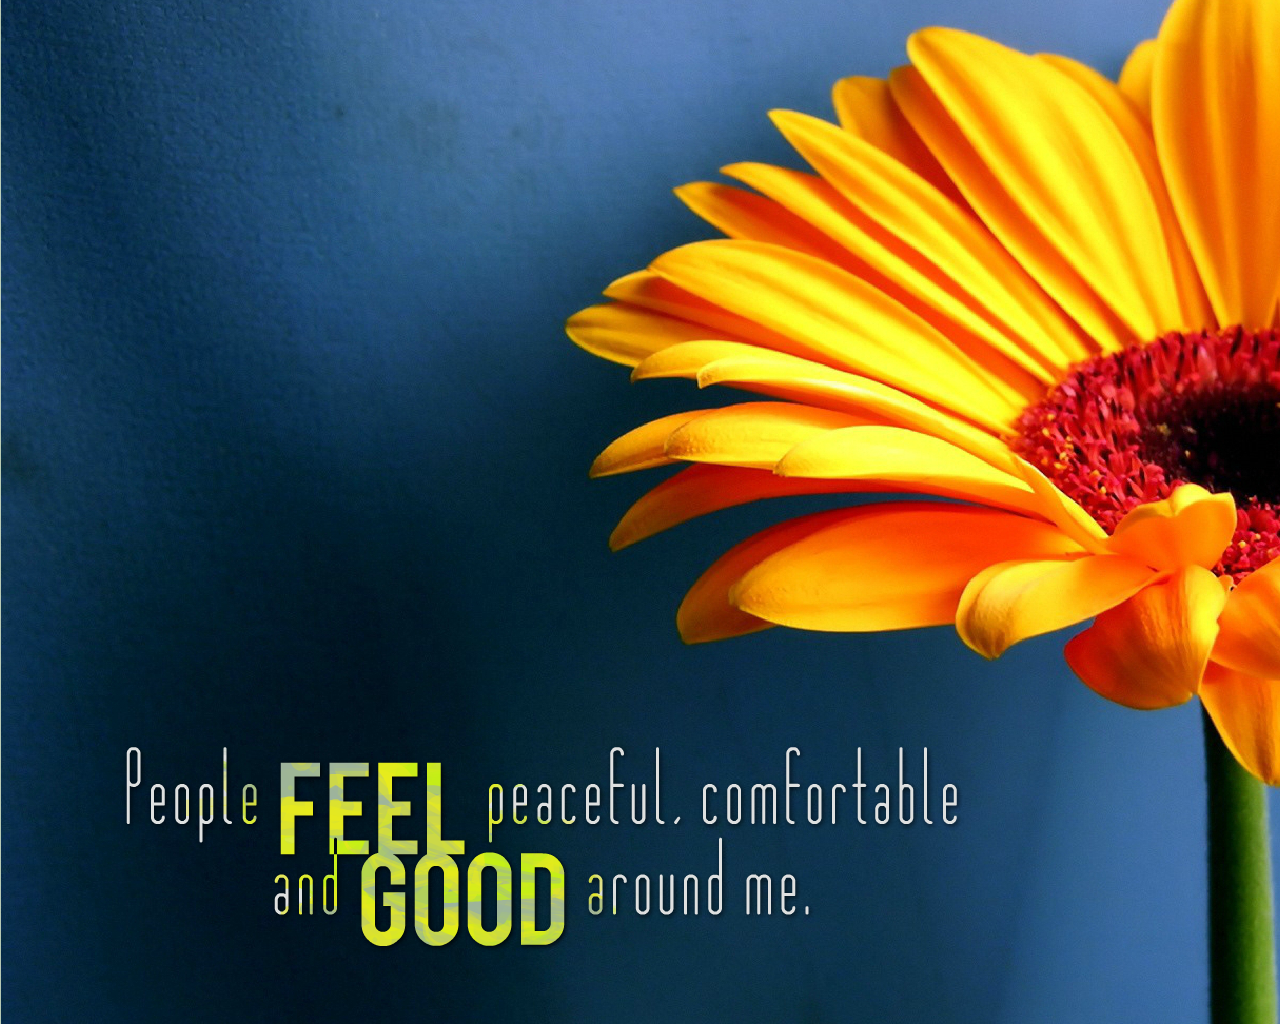 May 2014 Positive Affirmations Wallpapers, Positive Affirmations Wallpapers, Affirmations Wallpapers